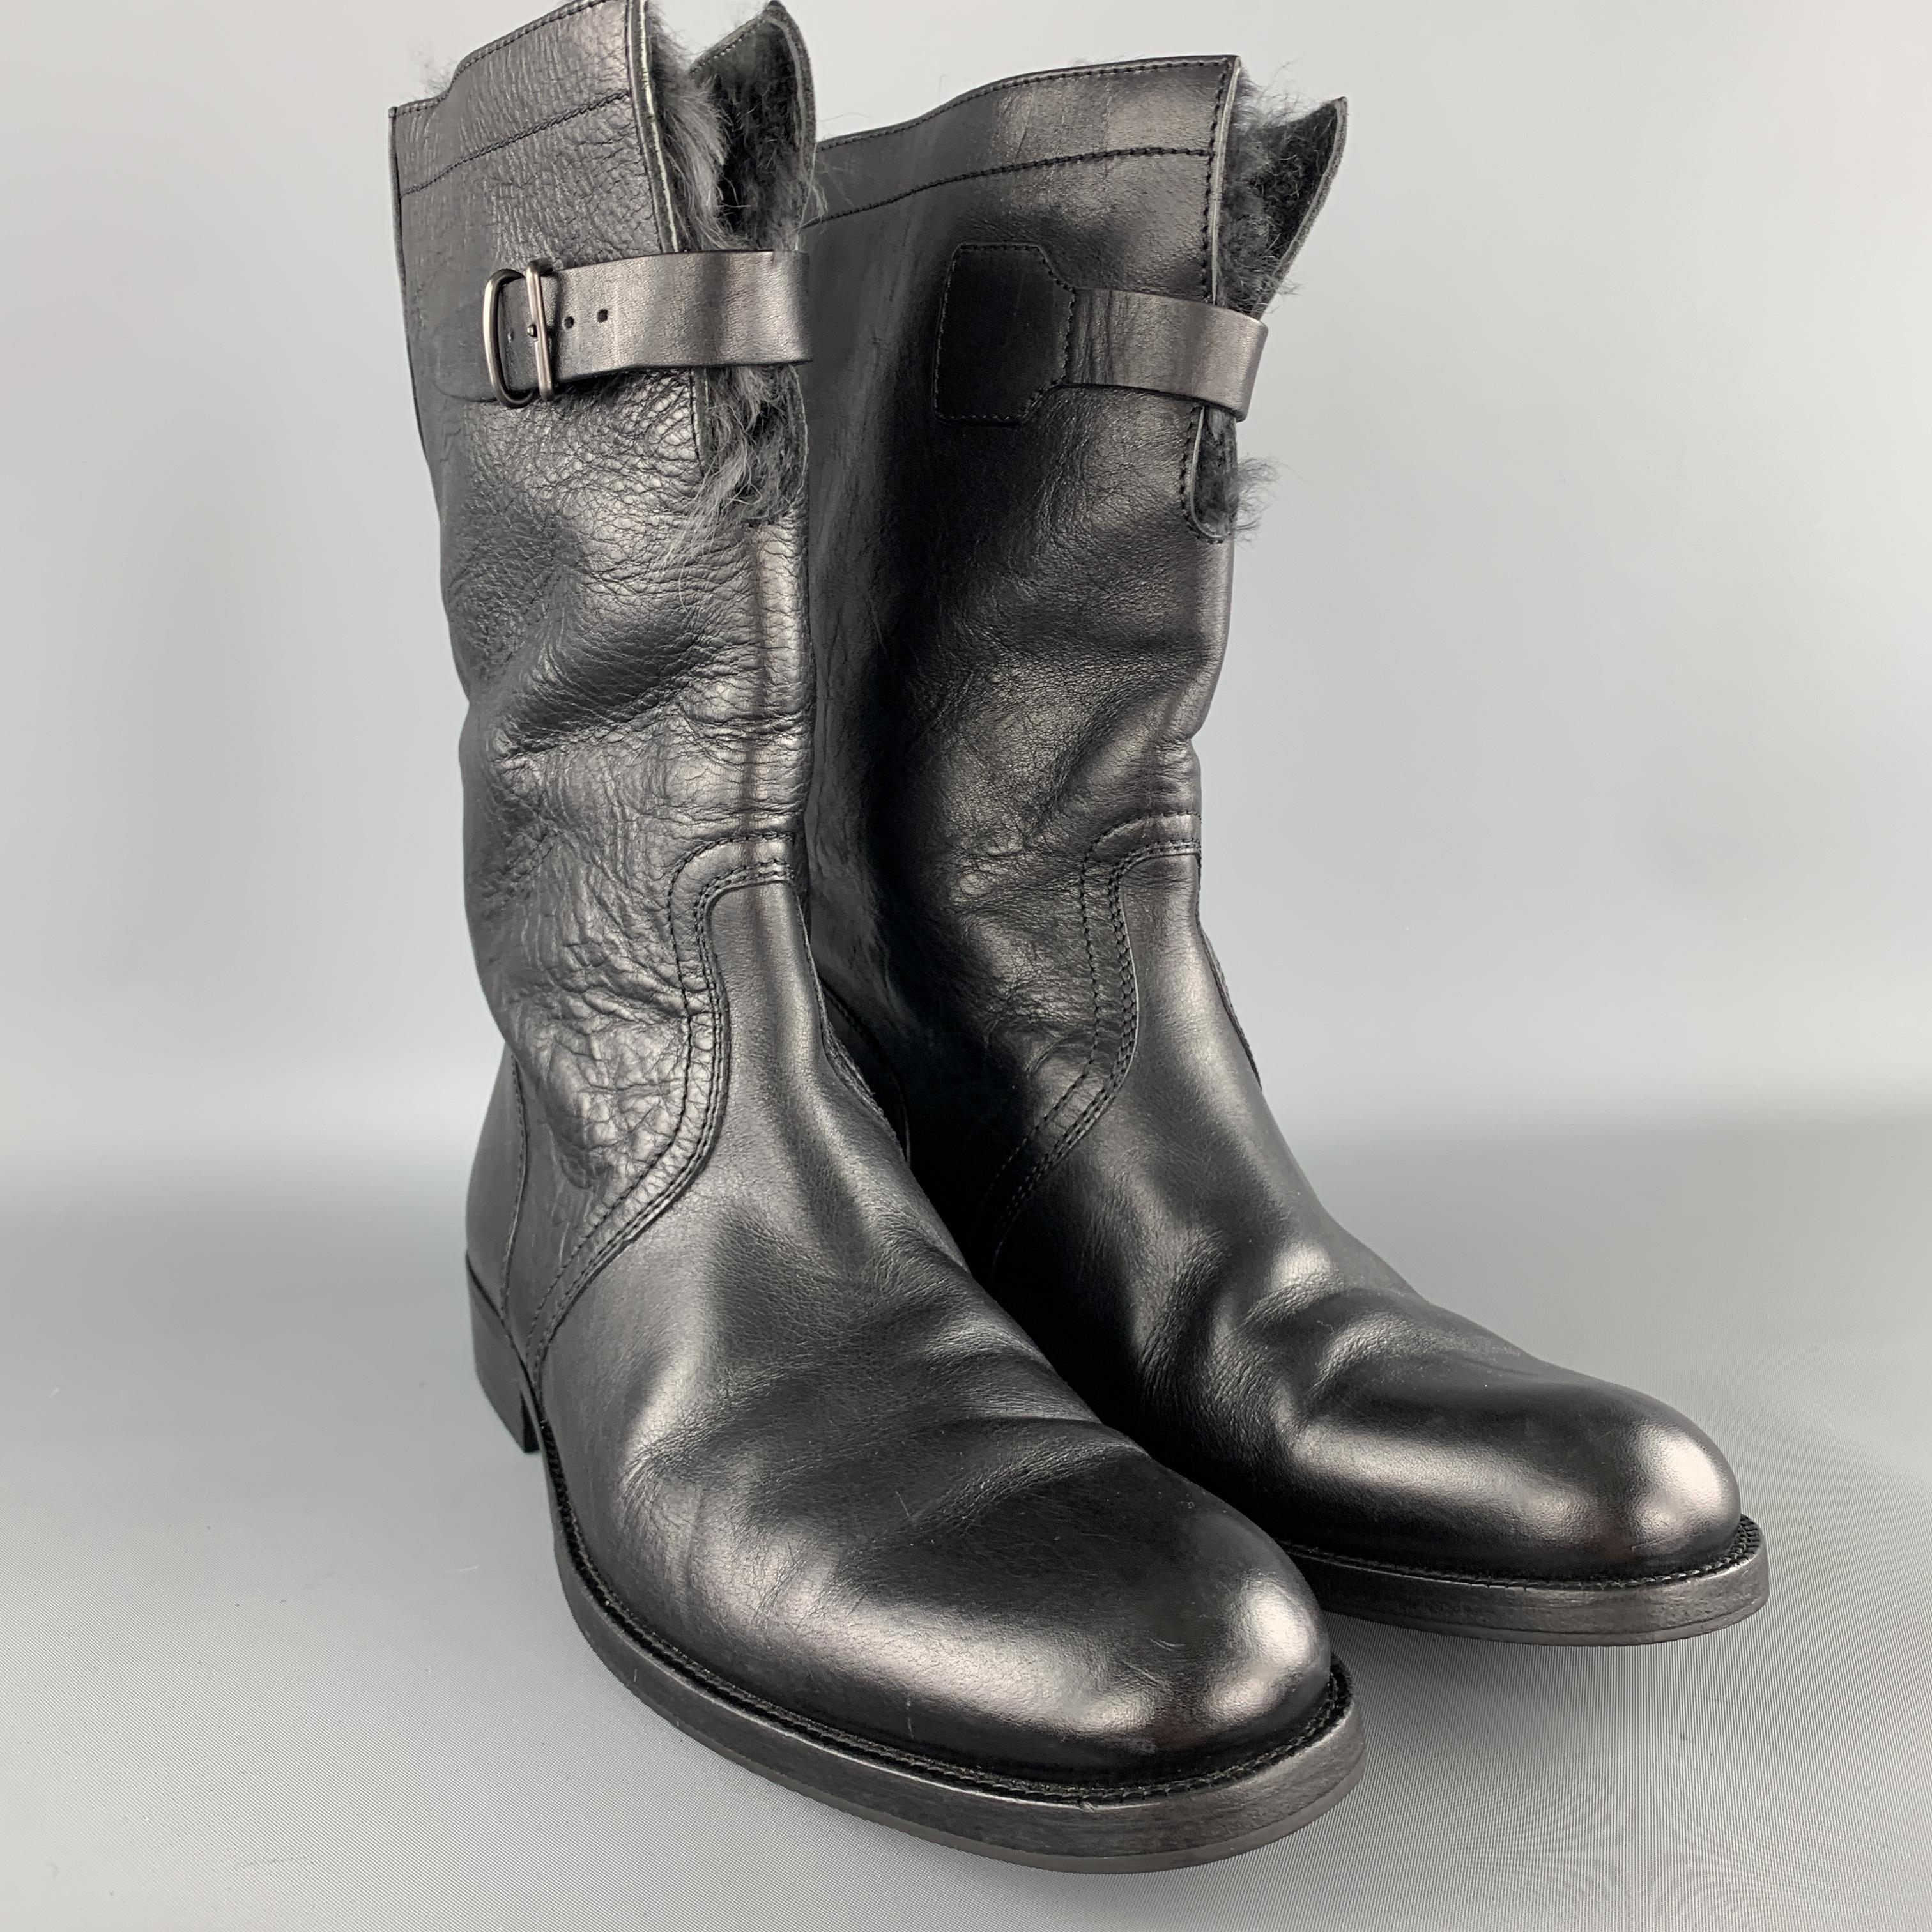 GUCCI calf length boots come in textured black leather with a buckle closure and fur liner. Made in Italy.

Excellent Pre-Owned Condition.
Marked: UK 7 1/2

Outsole: 11.75 3.75 in.
Height: 11 in.